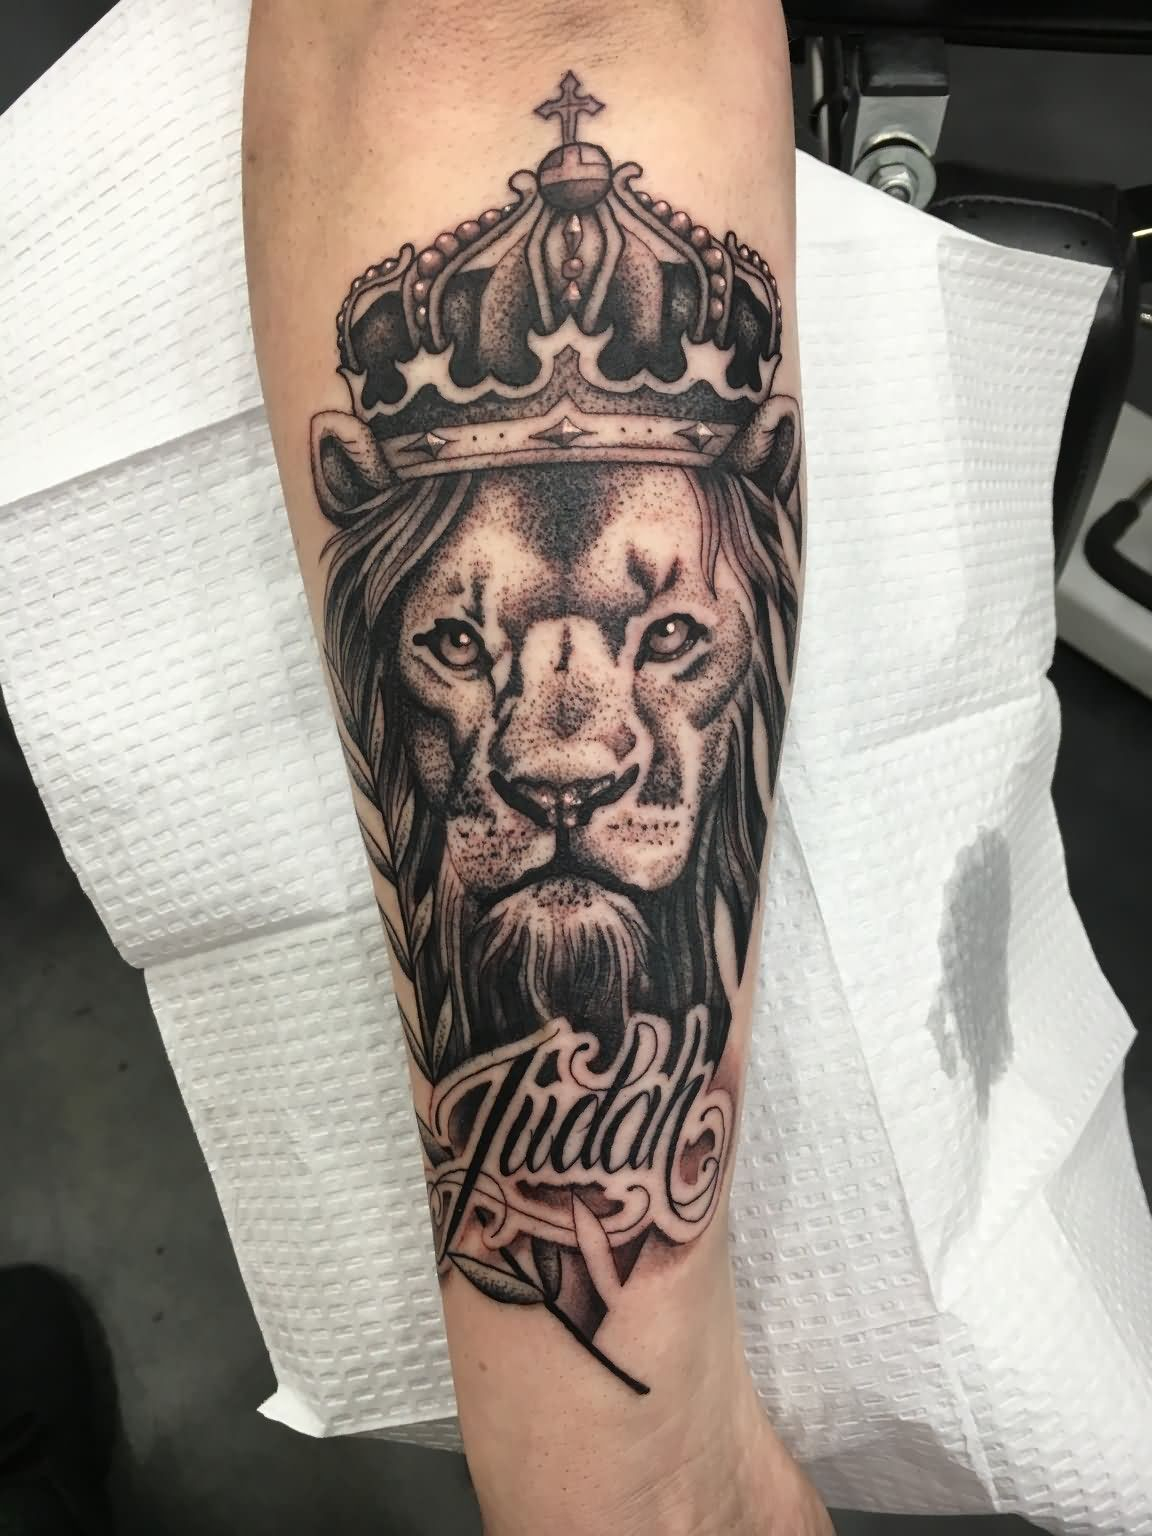 Black Ink Crown On Lion Head Tattoo On Left Arm Kohen Meyers within dimensions 1152 X 1536